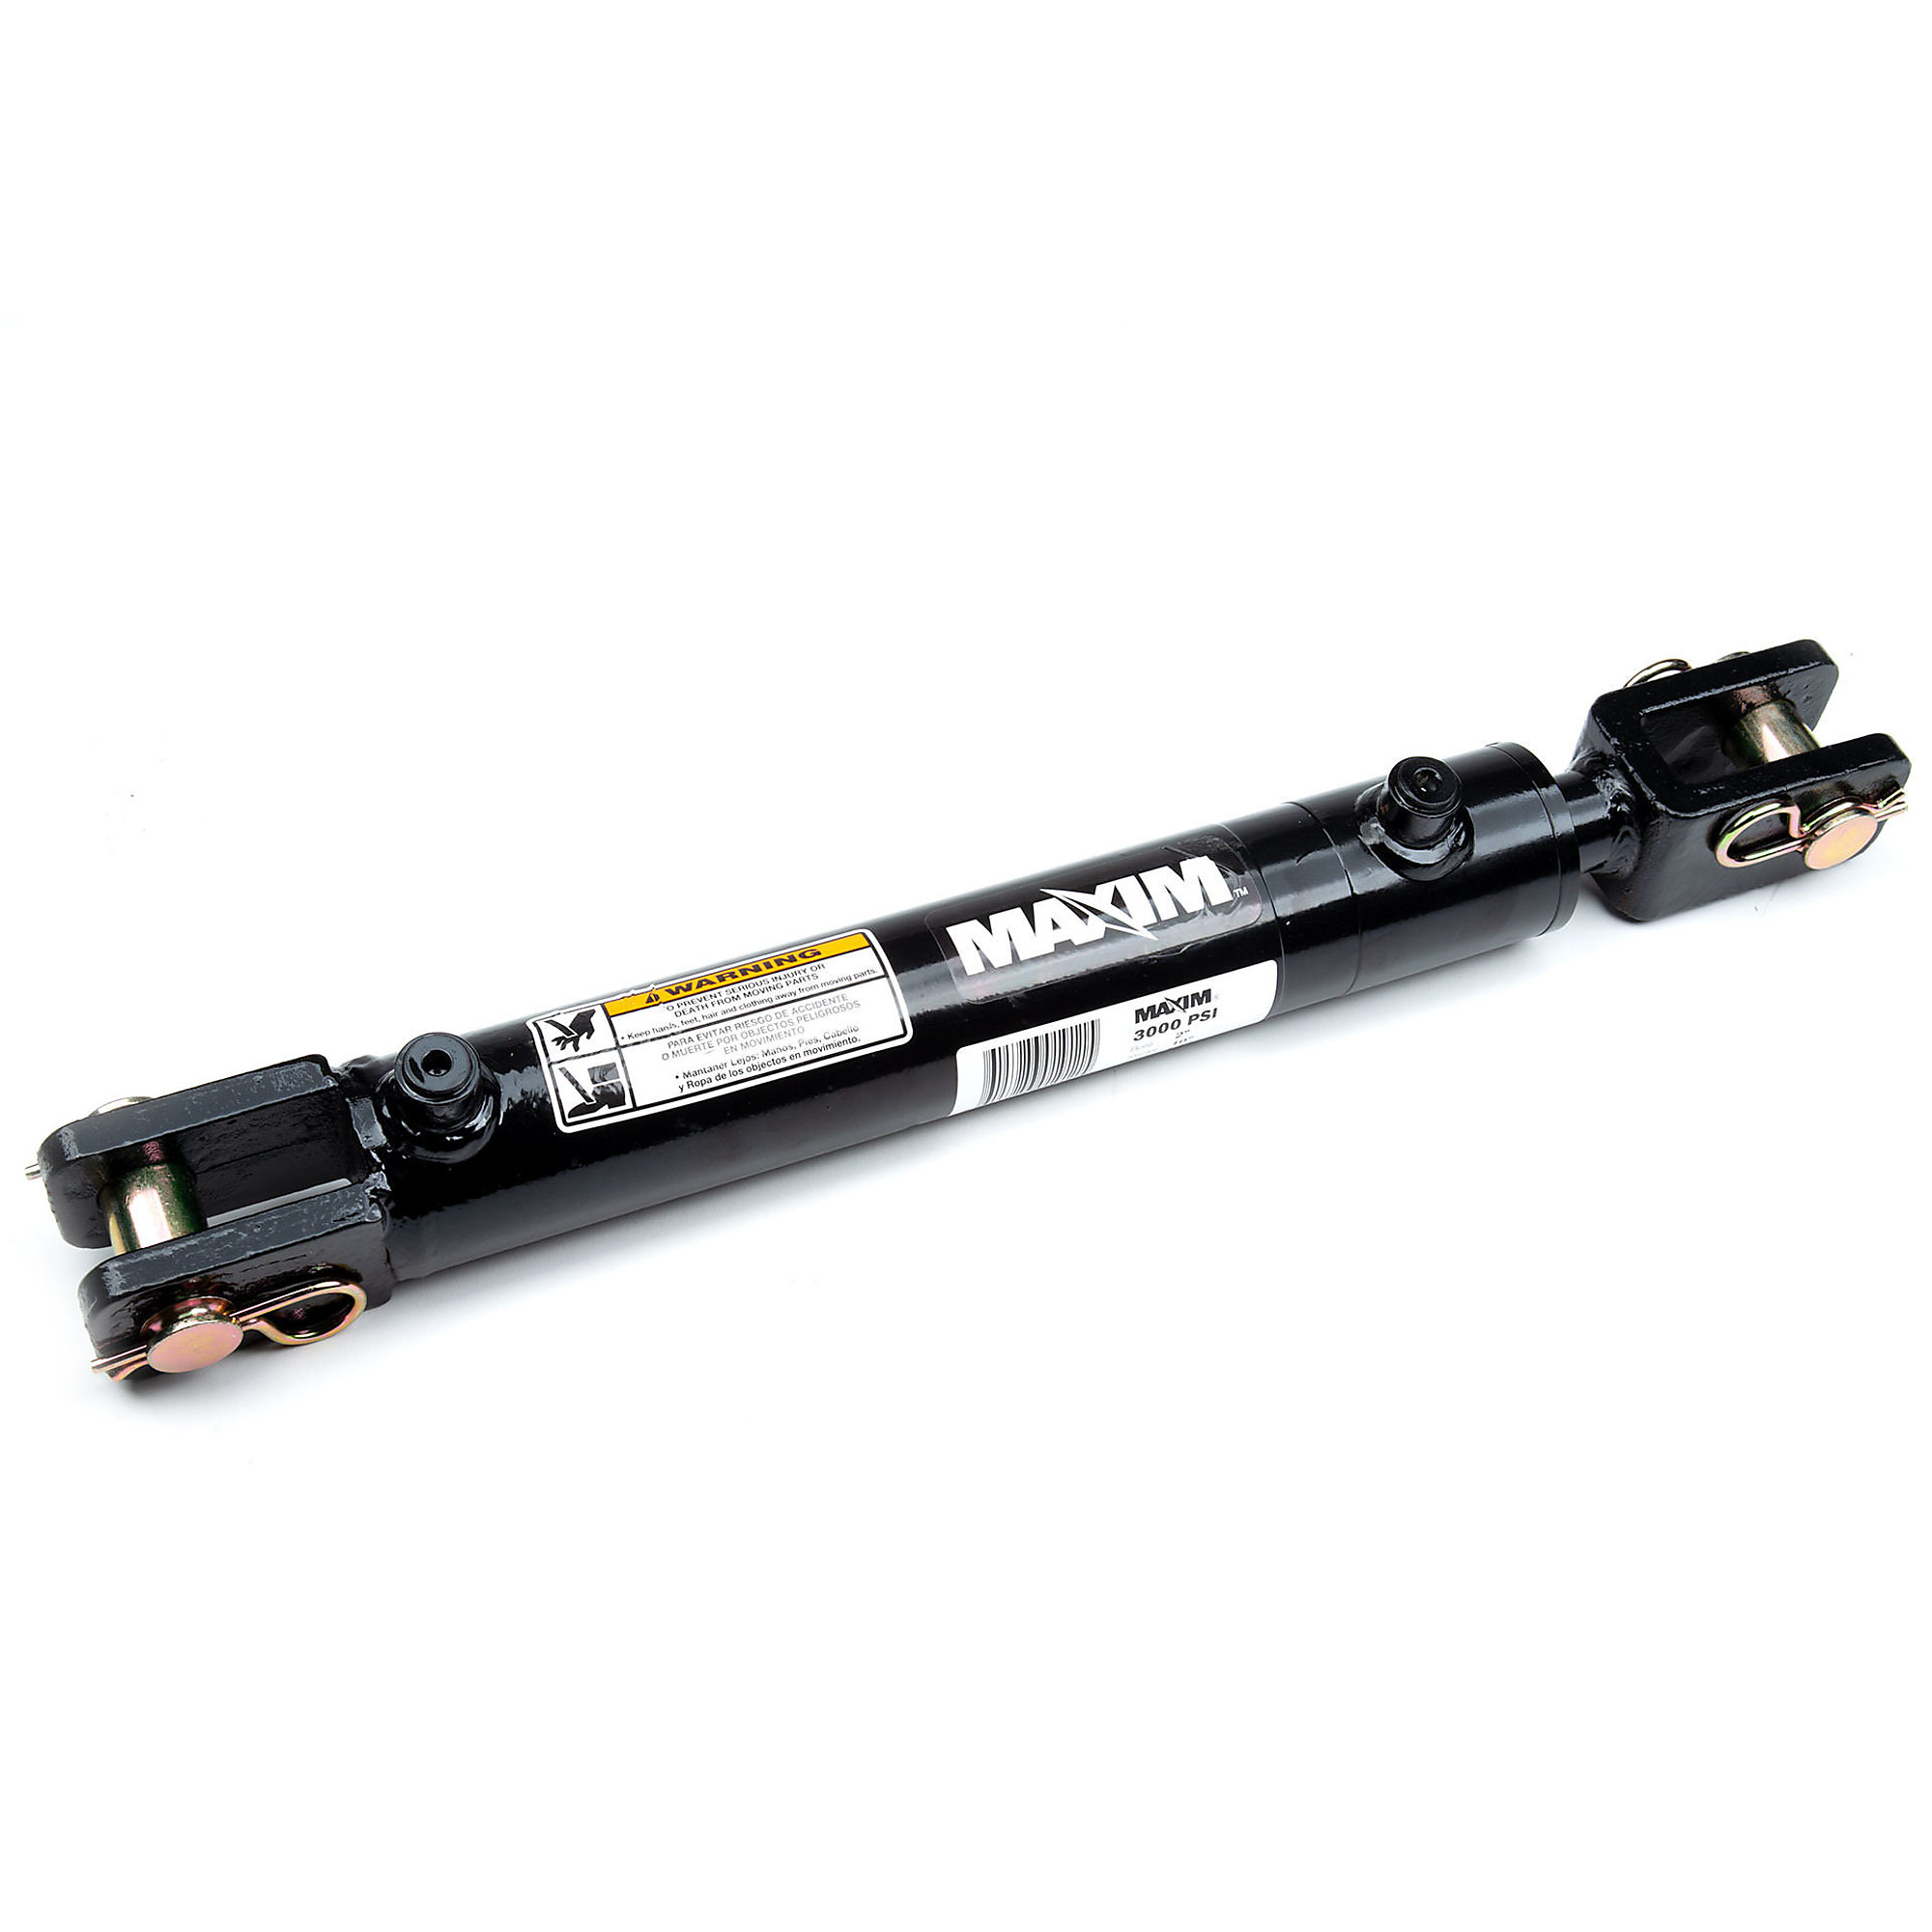 Maxim, WC Welded Cylinder, Max. PSI 3000, Bore Diameter 2.5 in, Stroke Length 24 in, Model 288423